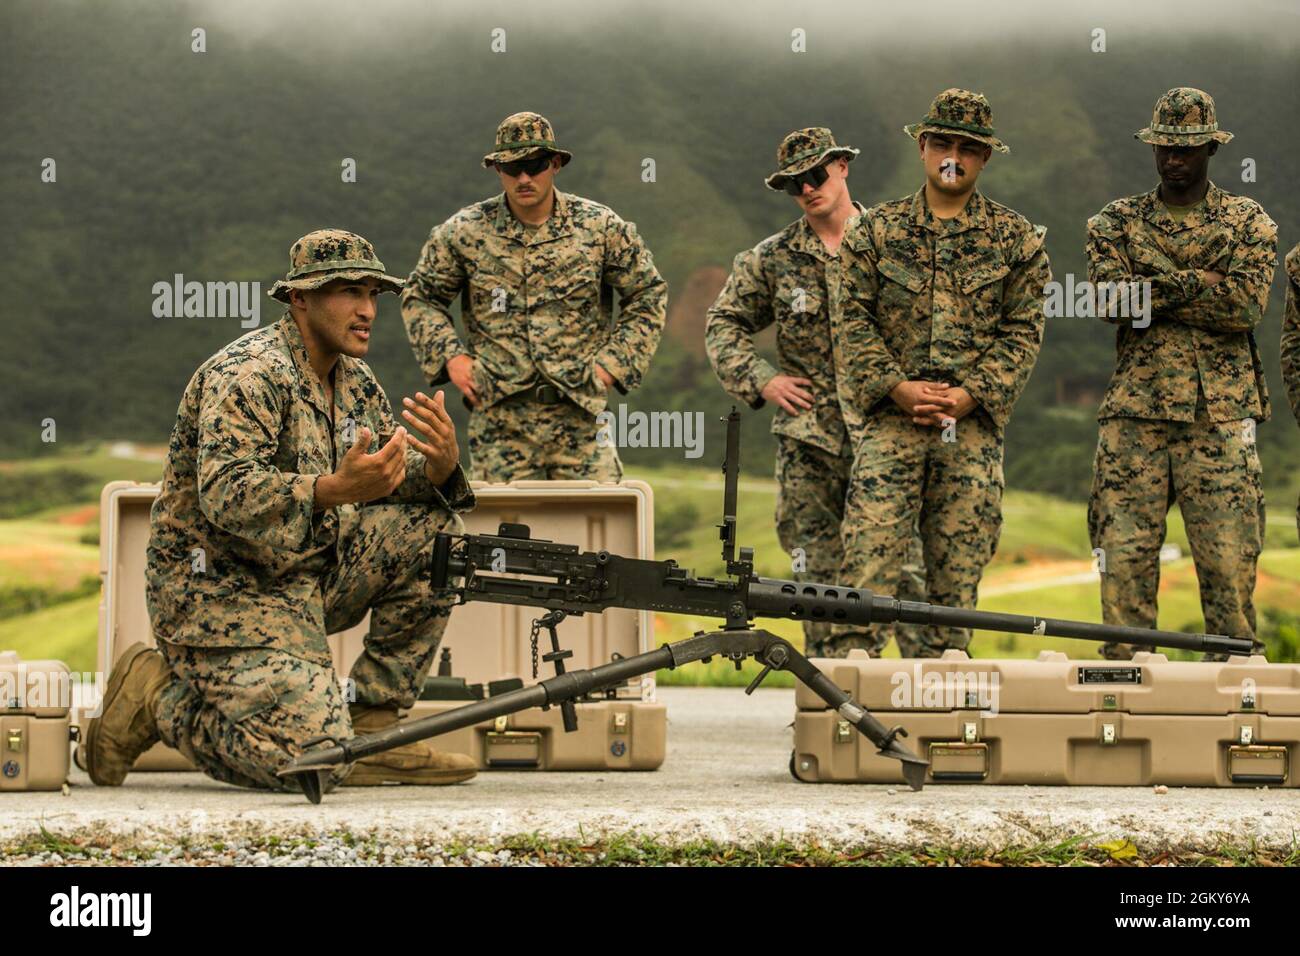 U.S. Marine Corps Cpl. Idan Urrutiagarces, a section leader with Fox Company, 2nd Battalion, 2nd Marines, 3d Marine Division, teaches Marines how to operate an M2 .50-caliber machine gun before conducting a machine gun course of fire on Range 10, Camp Schwab, Okinawa, Japan, July 26, 2021. Marines with 3d Landing Support Battalion, Combat Logistics Regiment 3, 3d Marine Logistics Group, assisted by Marines with 2/2, conducted a range to maintain proficiency while utilizing mounted M2 .50-caliber and M240B medium machine guns. 3d MLG, based out of Okinawa, Japan, is a forward deployed combat un Stock Photo